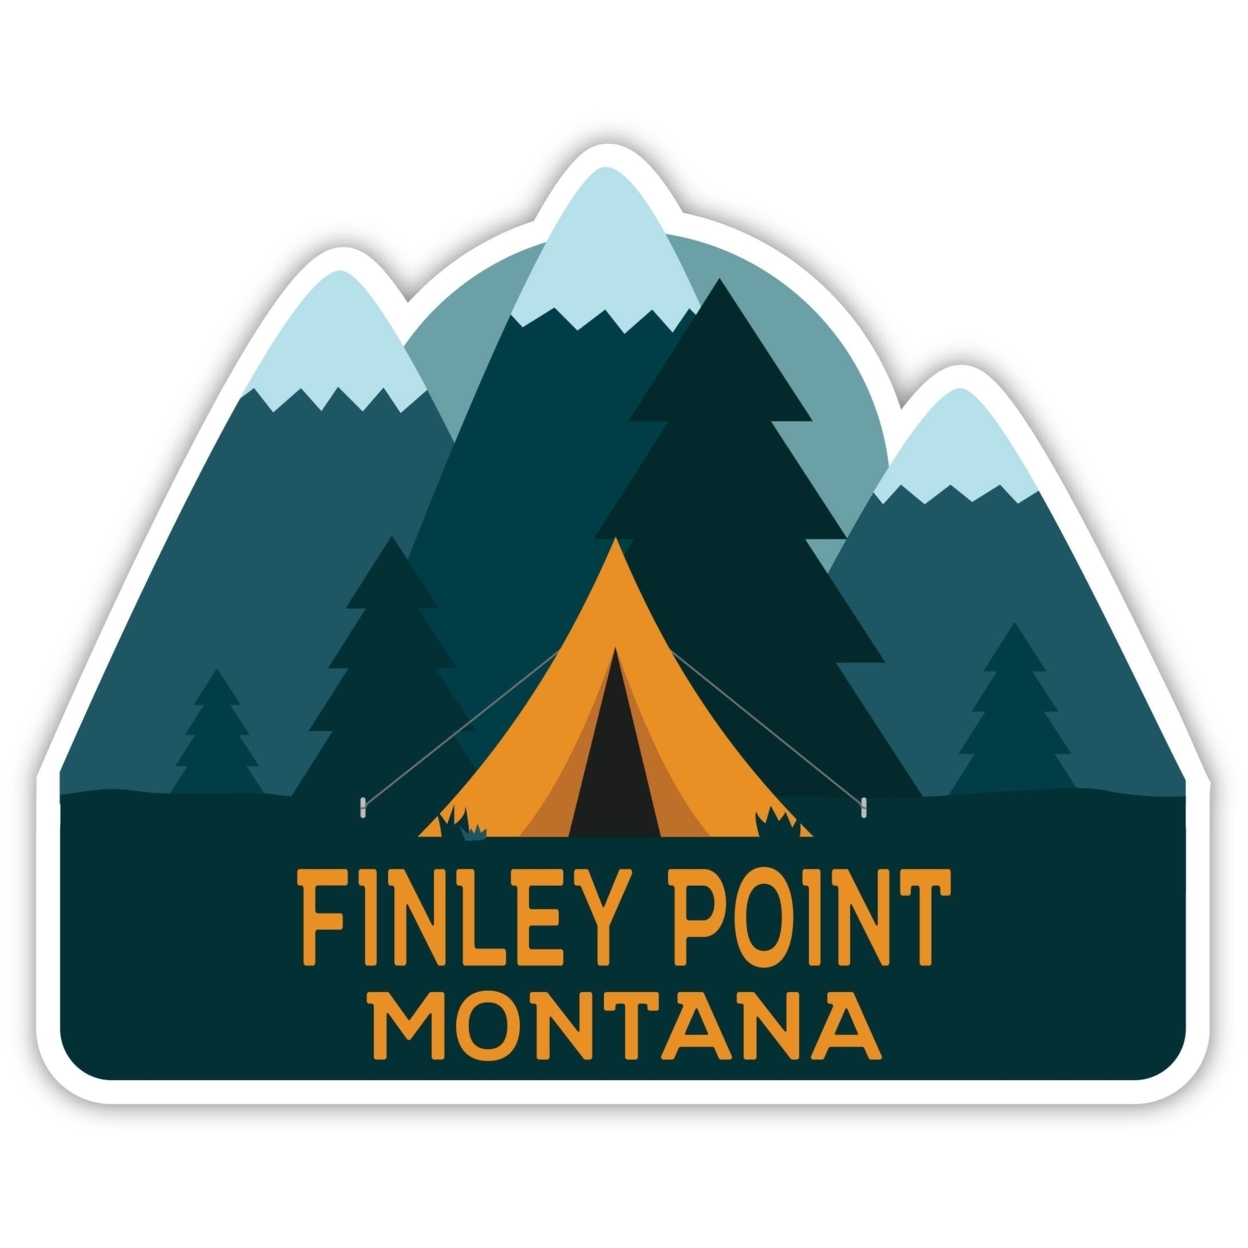 Finley Point Montana Souvenir Decorative Stickers (Choose Theme And Size) - 4-Pack, 2-Inch, Tent